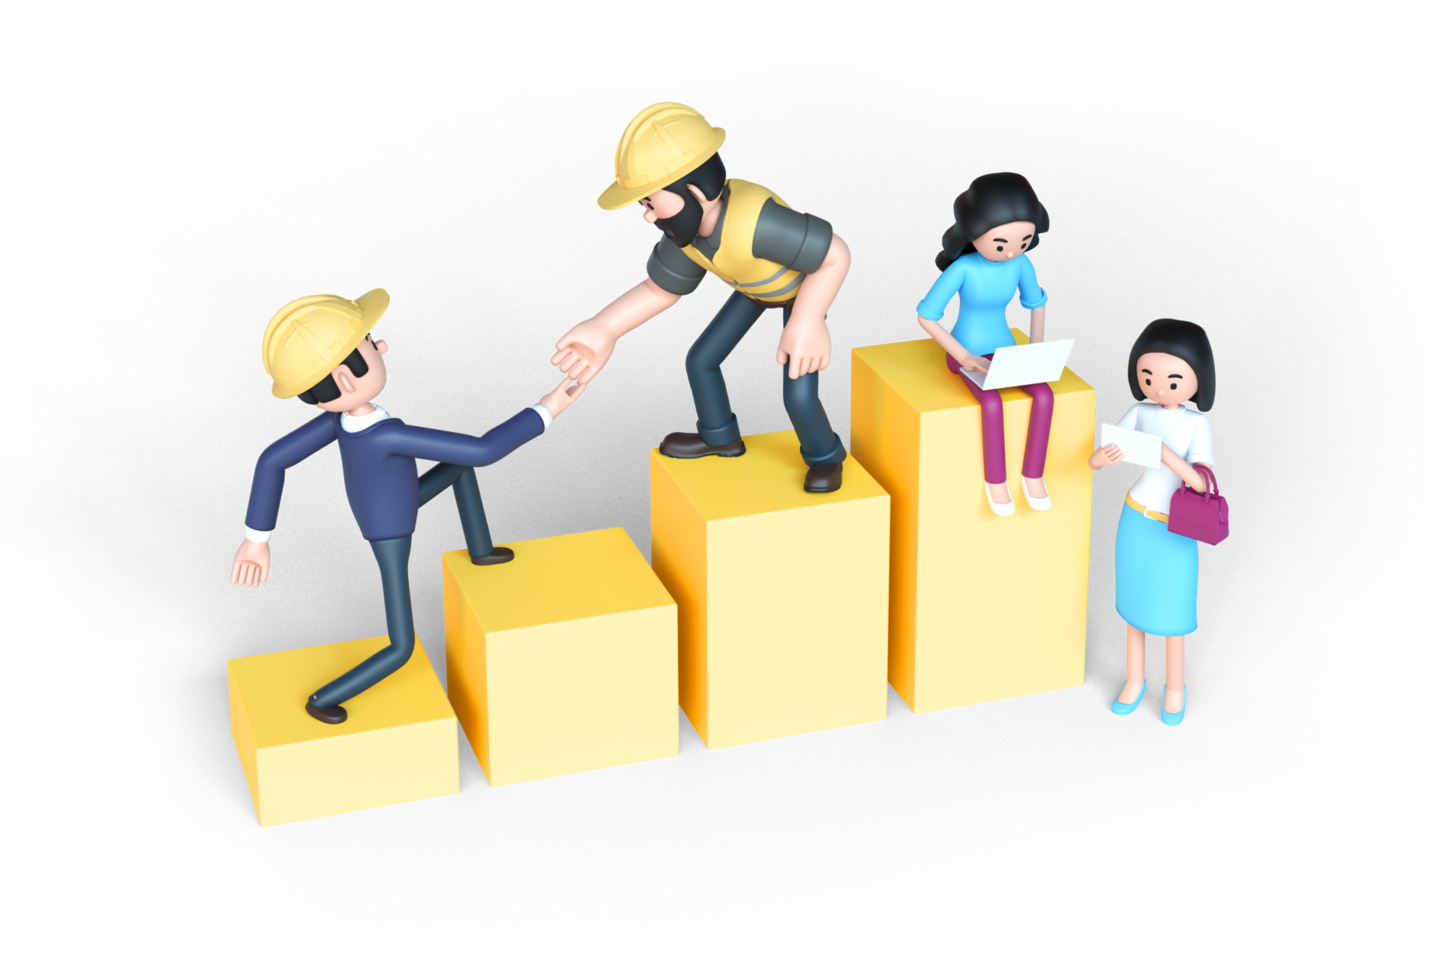 Image of illustrated figures climbing on to blocks